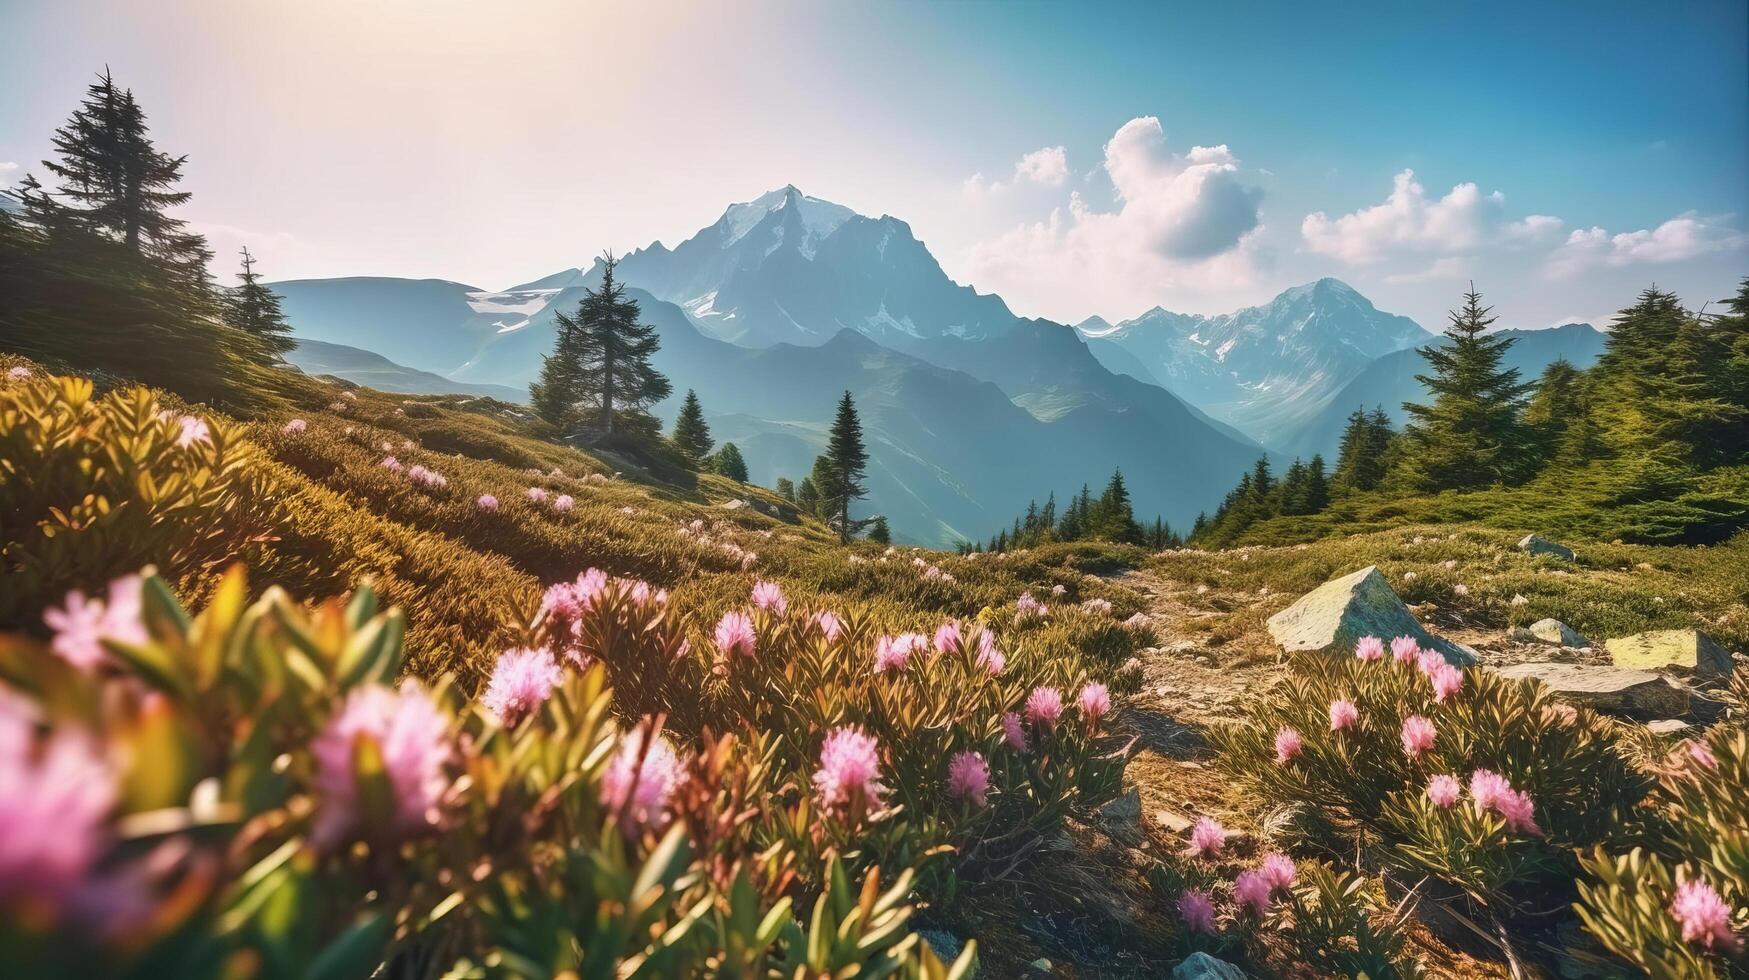 Pink flowers in mountain. Illustration photo